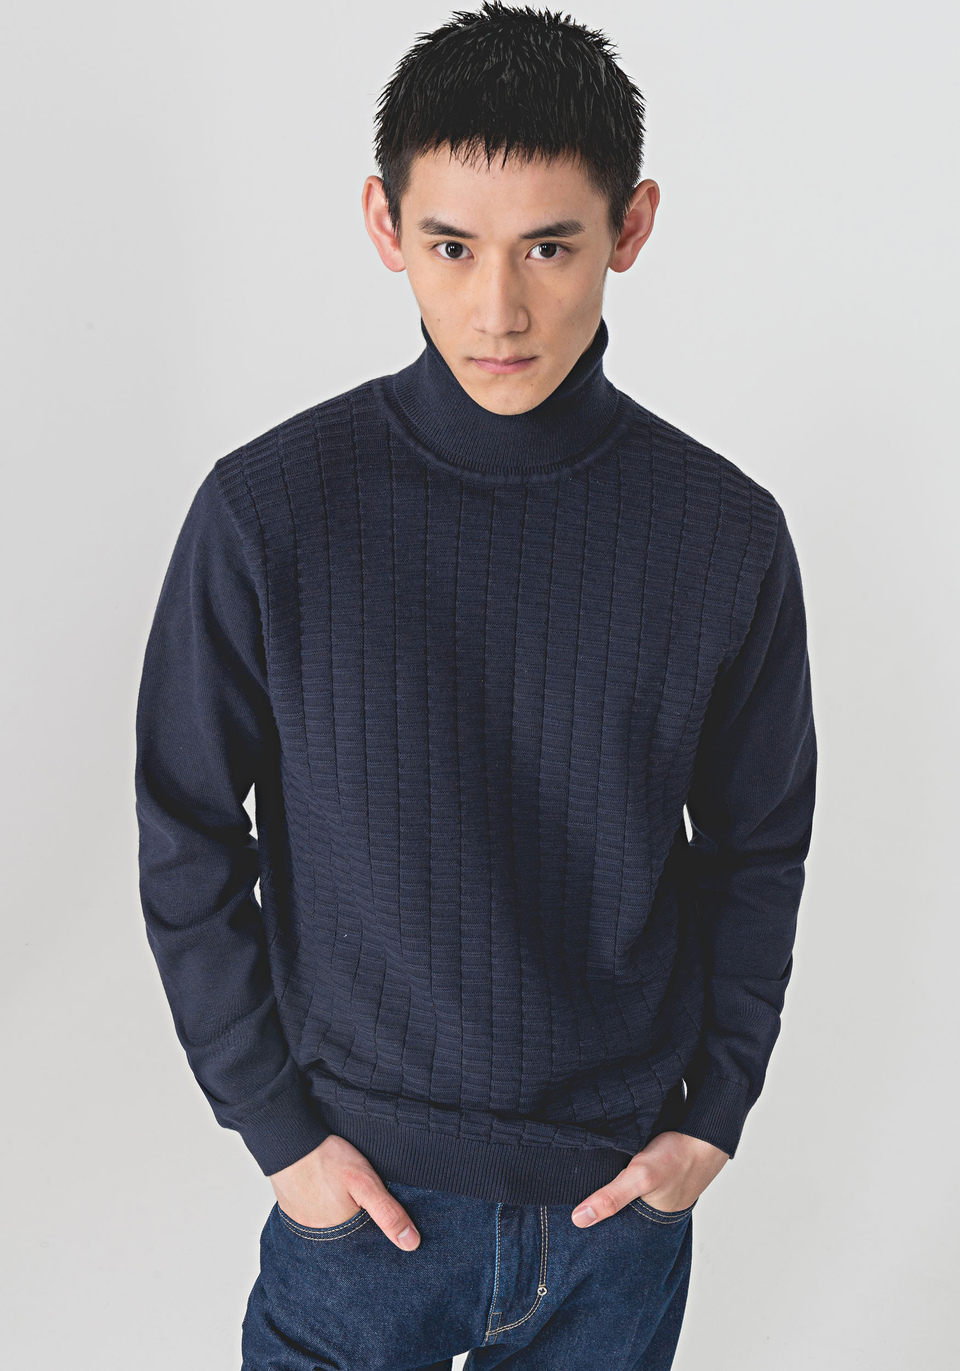 HIGH-NECK SWEATER IN A SOFT COTTON-WOOL BLEND WITH A GEOMETRICAL PATTERN - Antony Morato Online Shop